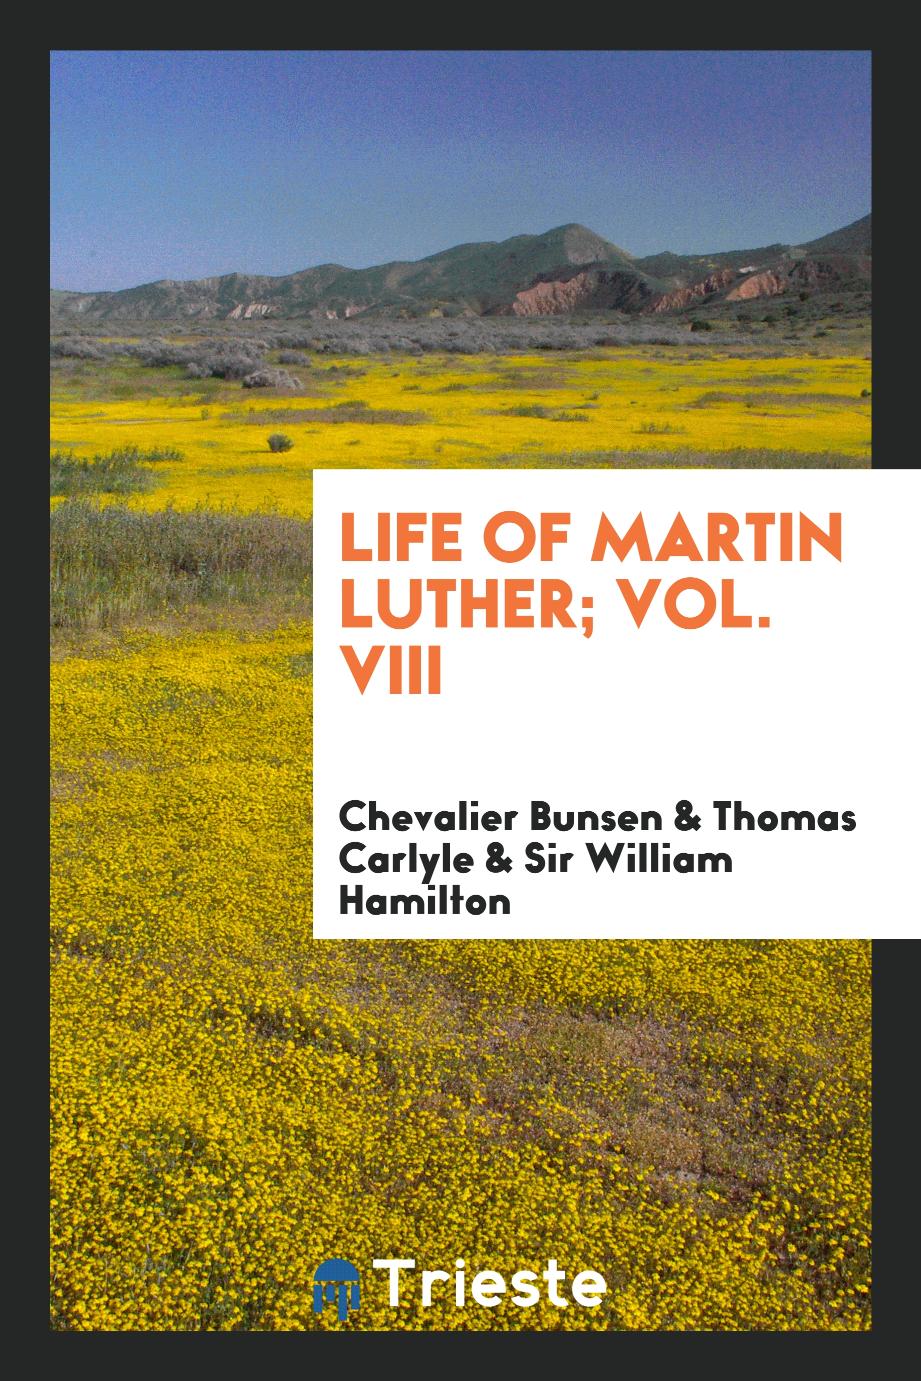 Life of Martin Luther; Vol. VIII